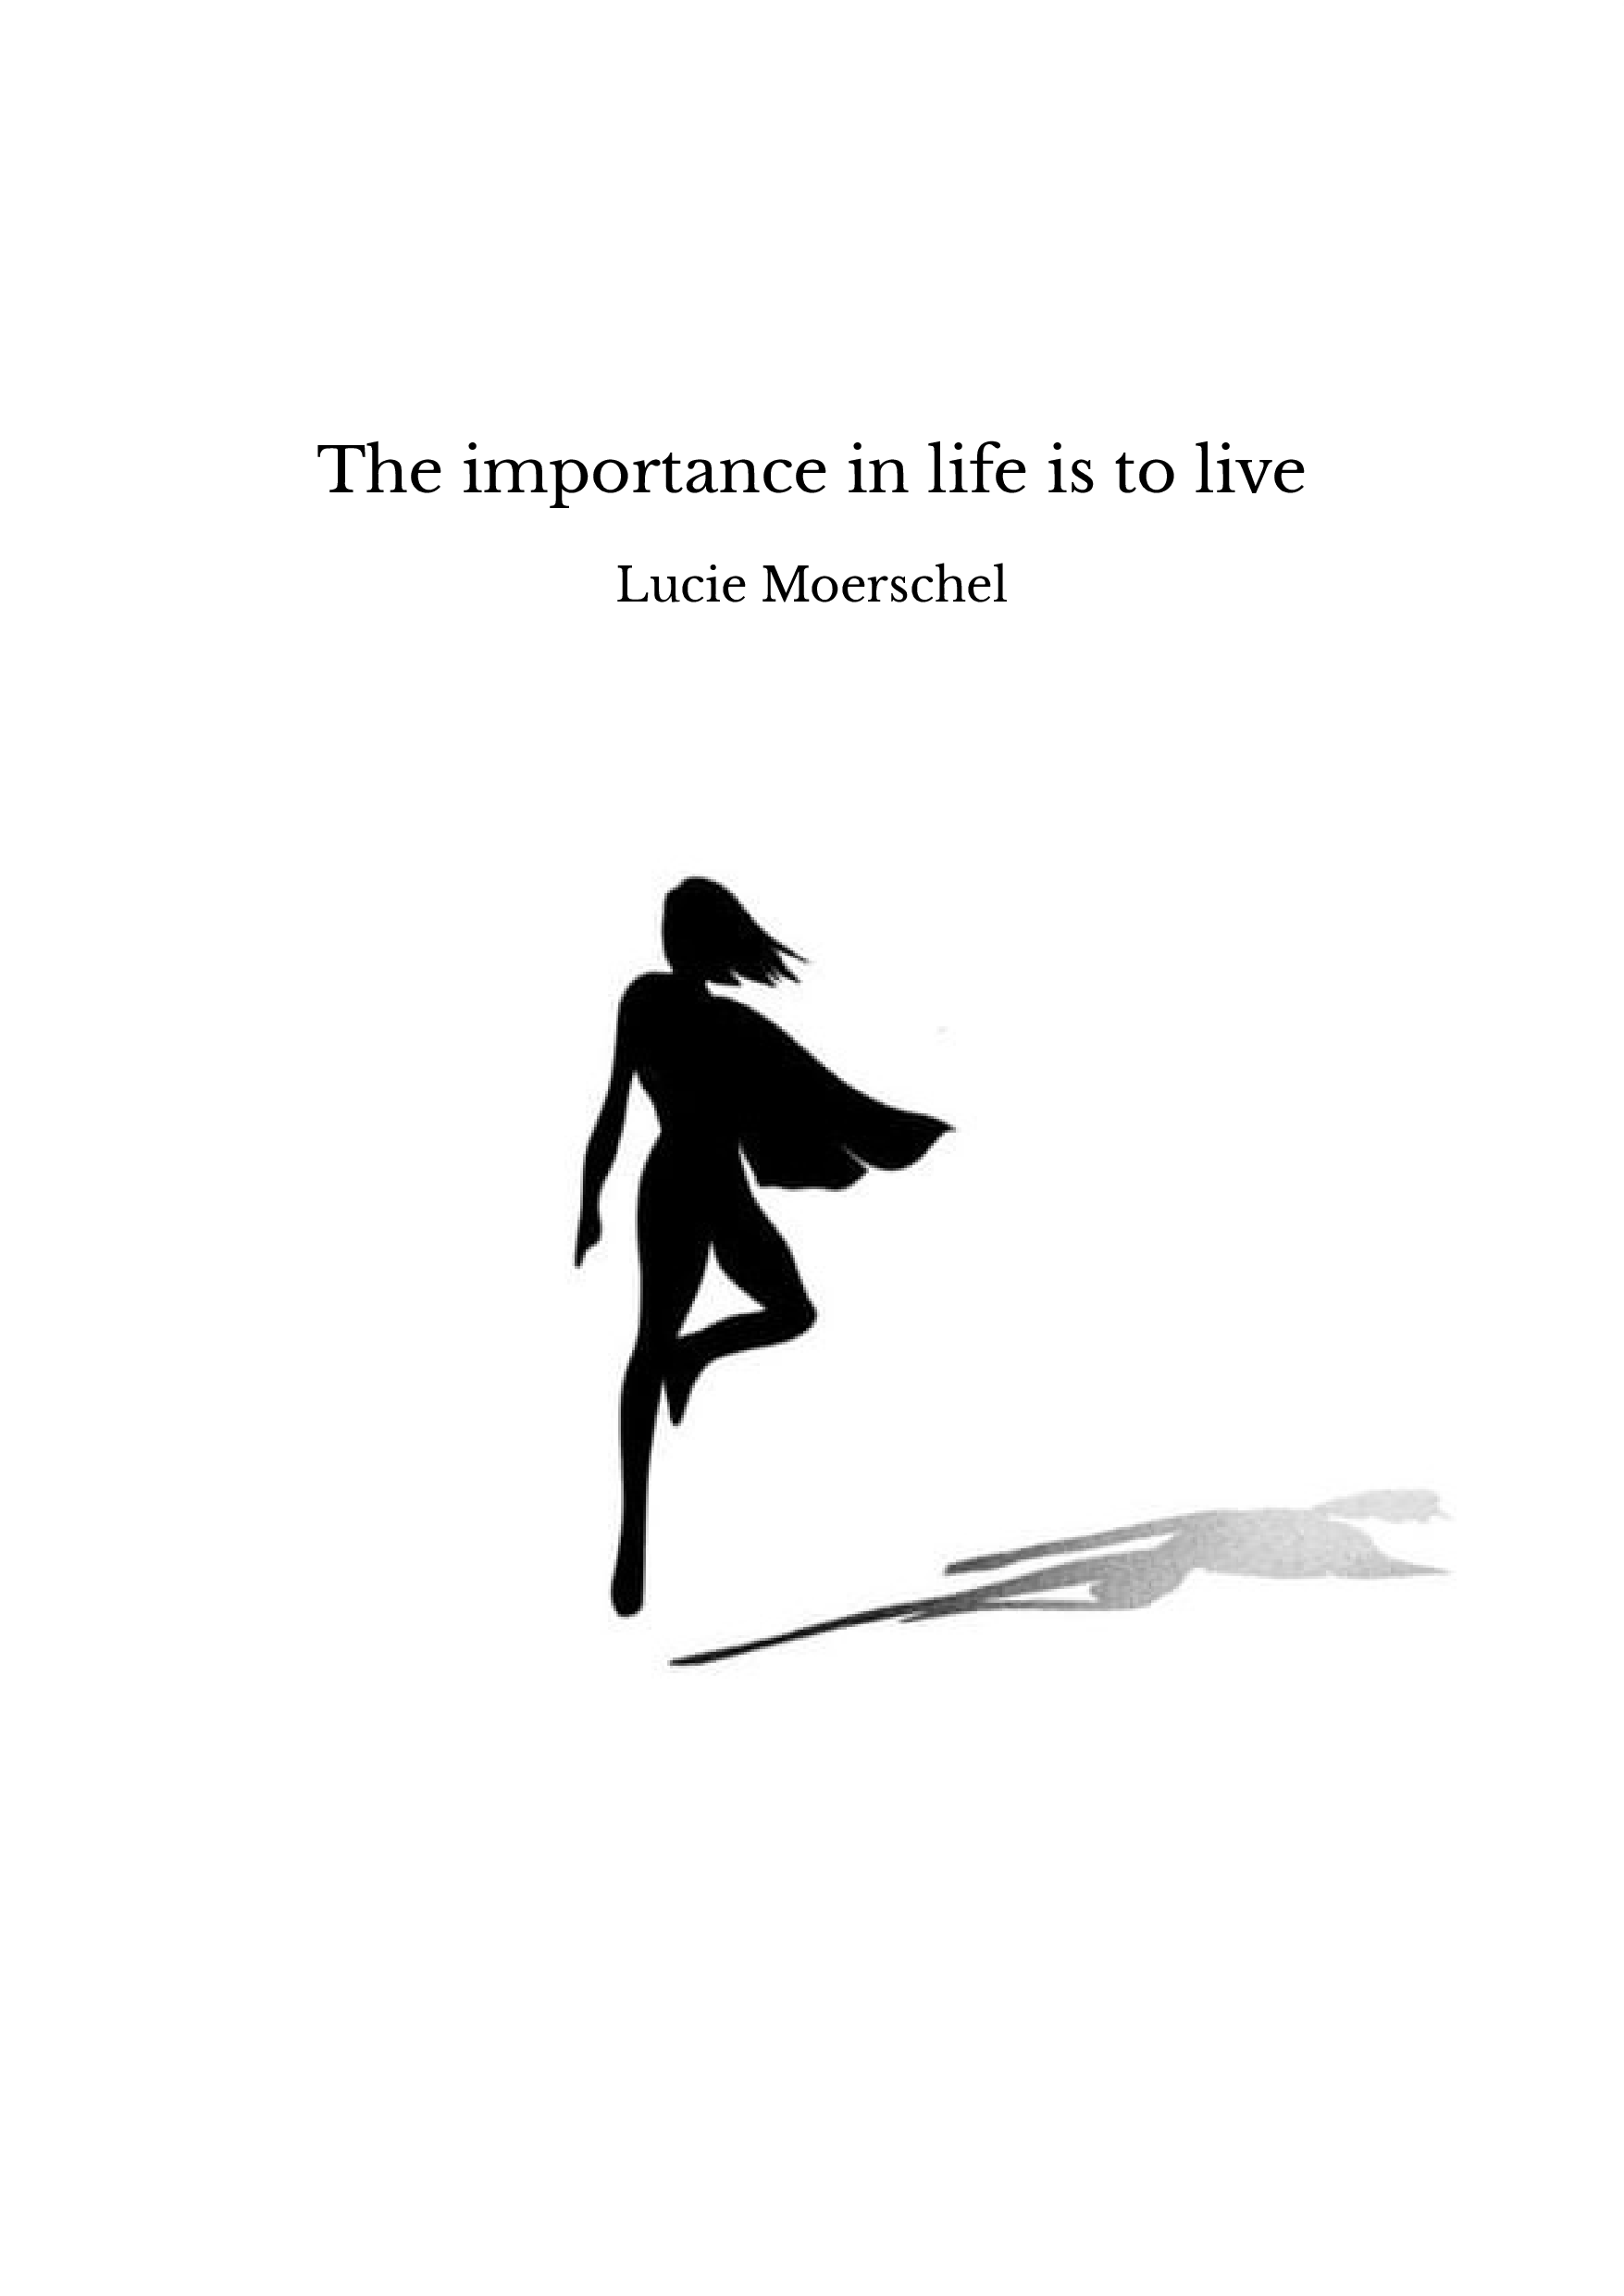 The importance in life is to live